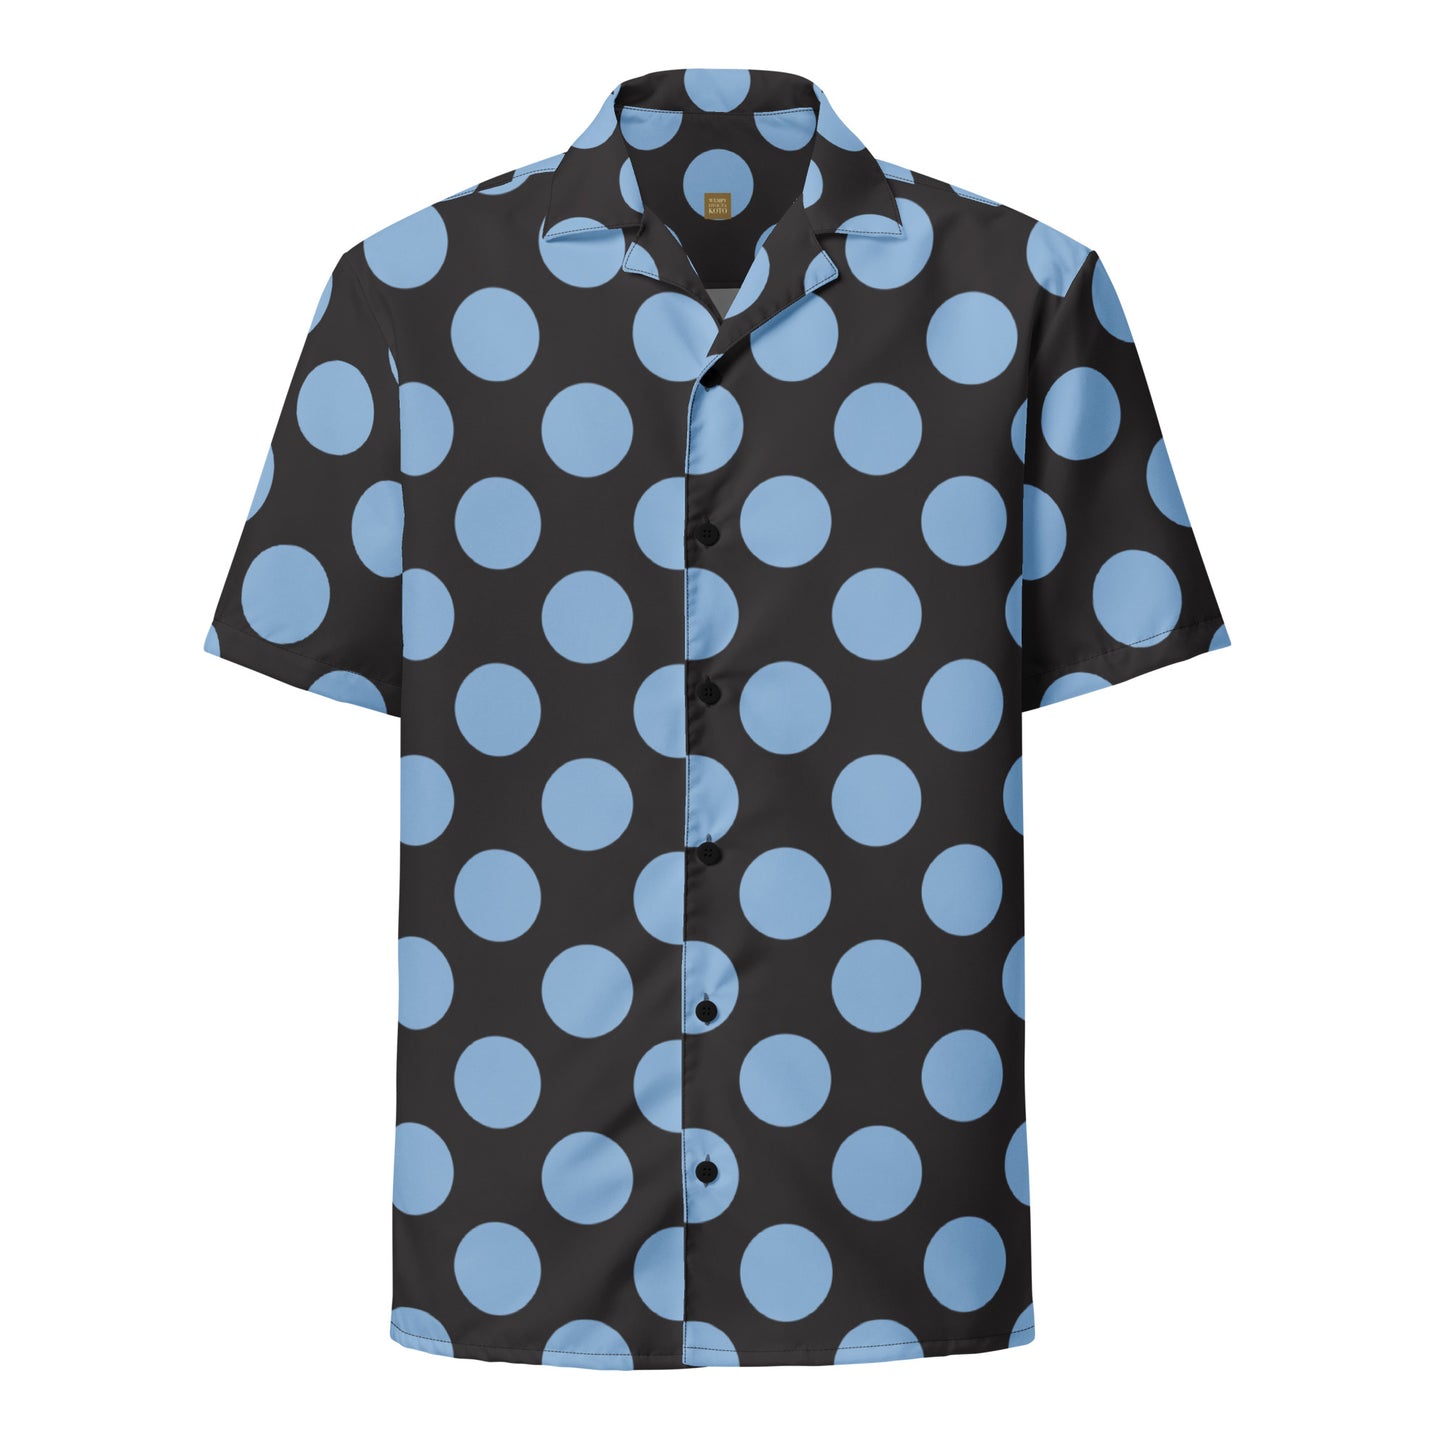 Blue Polkadot - Inspired By Harry Styles - Sustainably Made Unisex button shirt